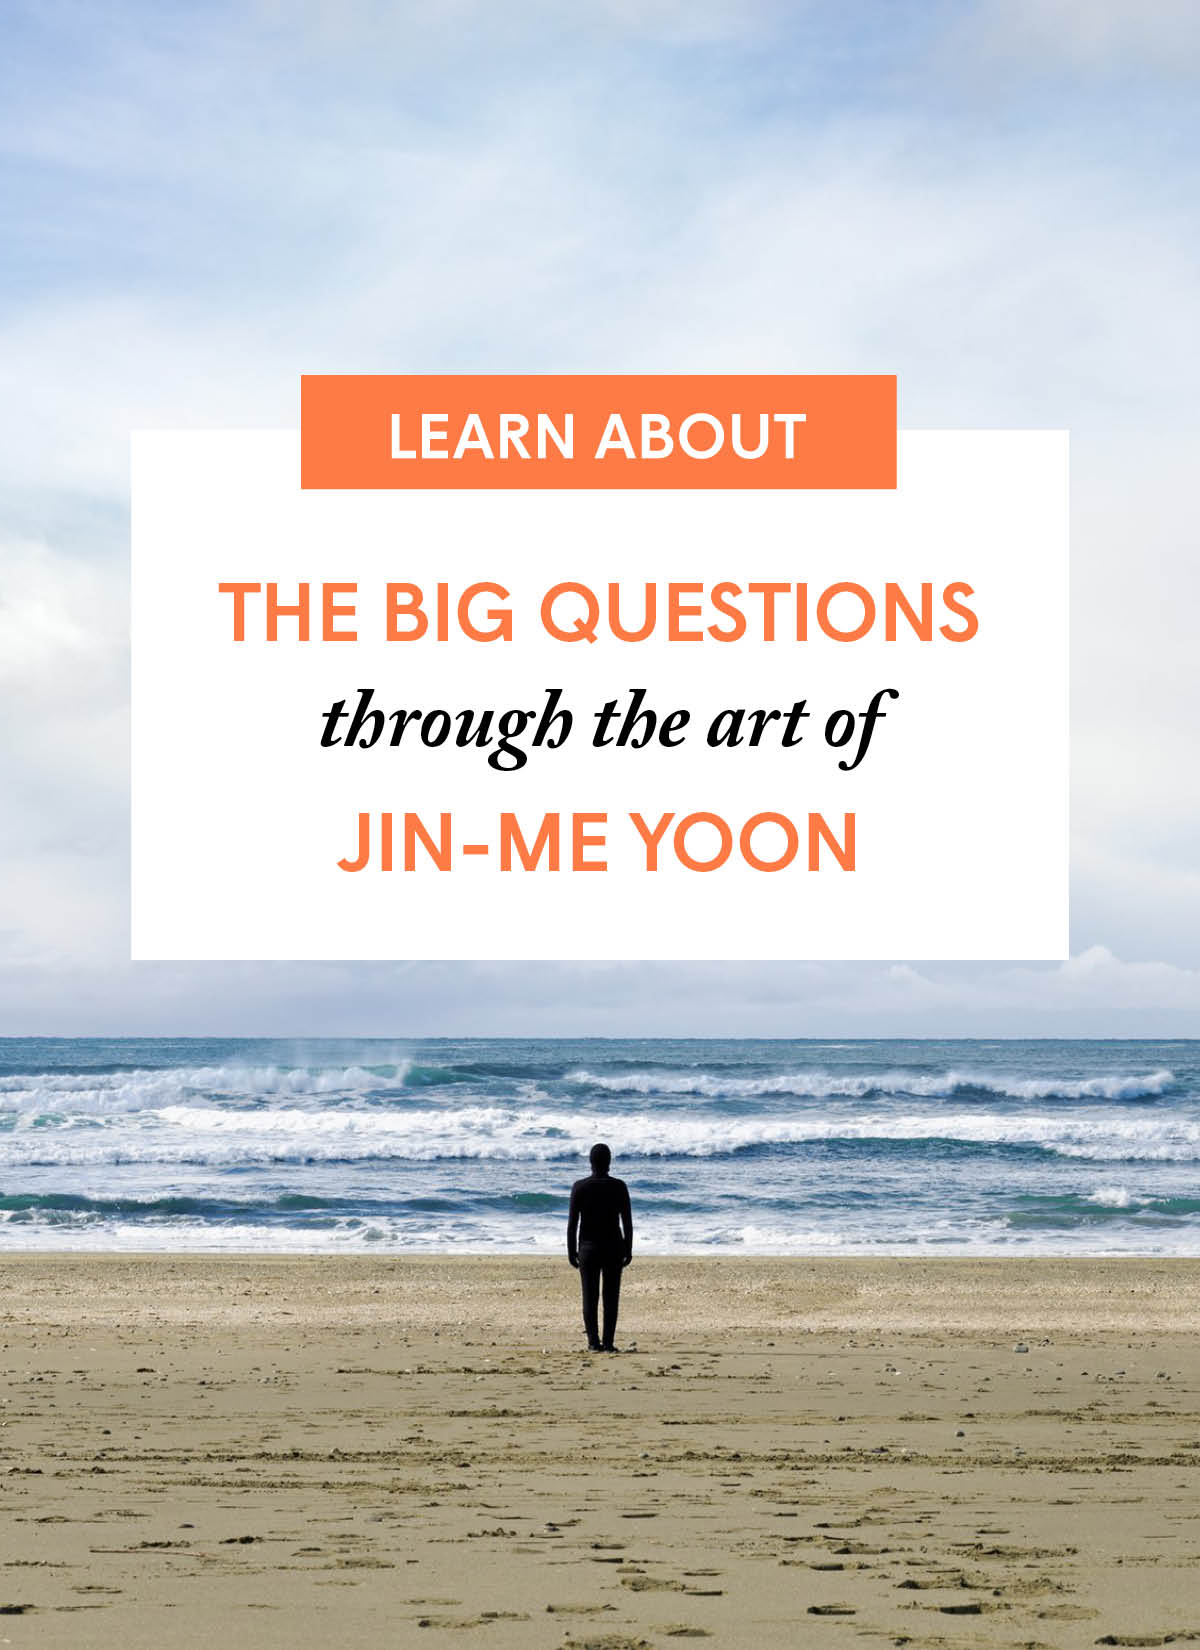 The Big Questions through the art of Jin-me Yoon